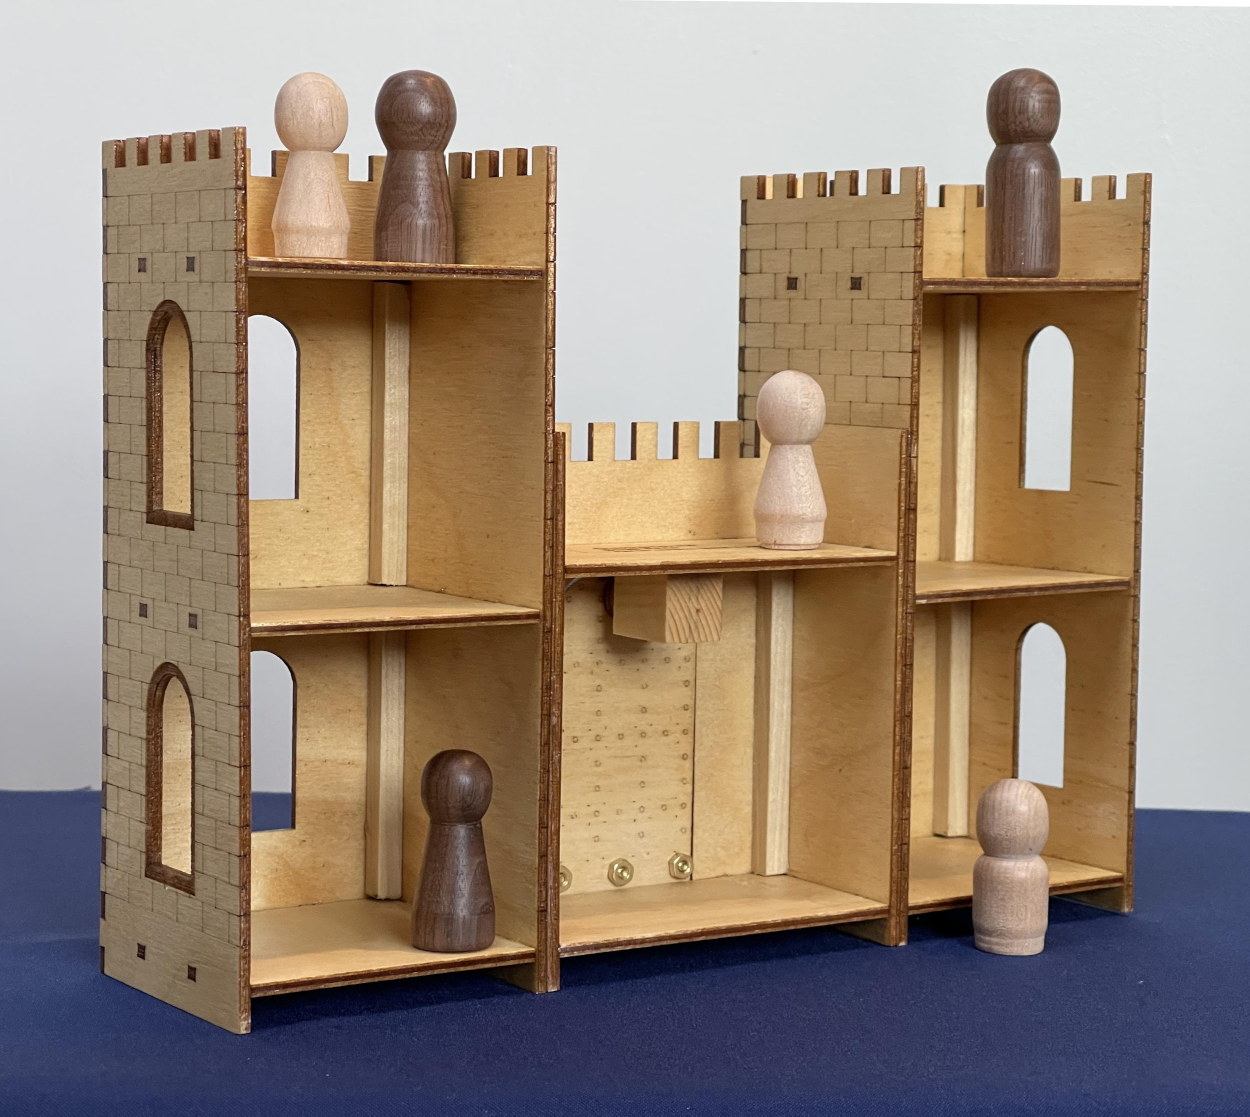 Whit Anderson: Castle Toy